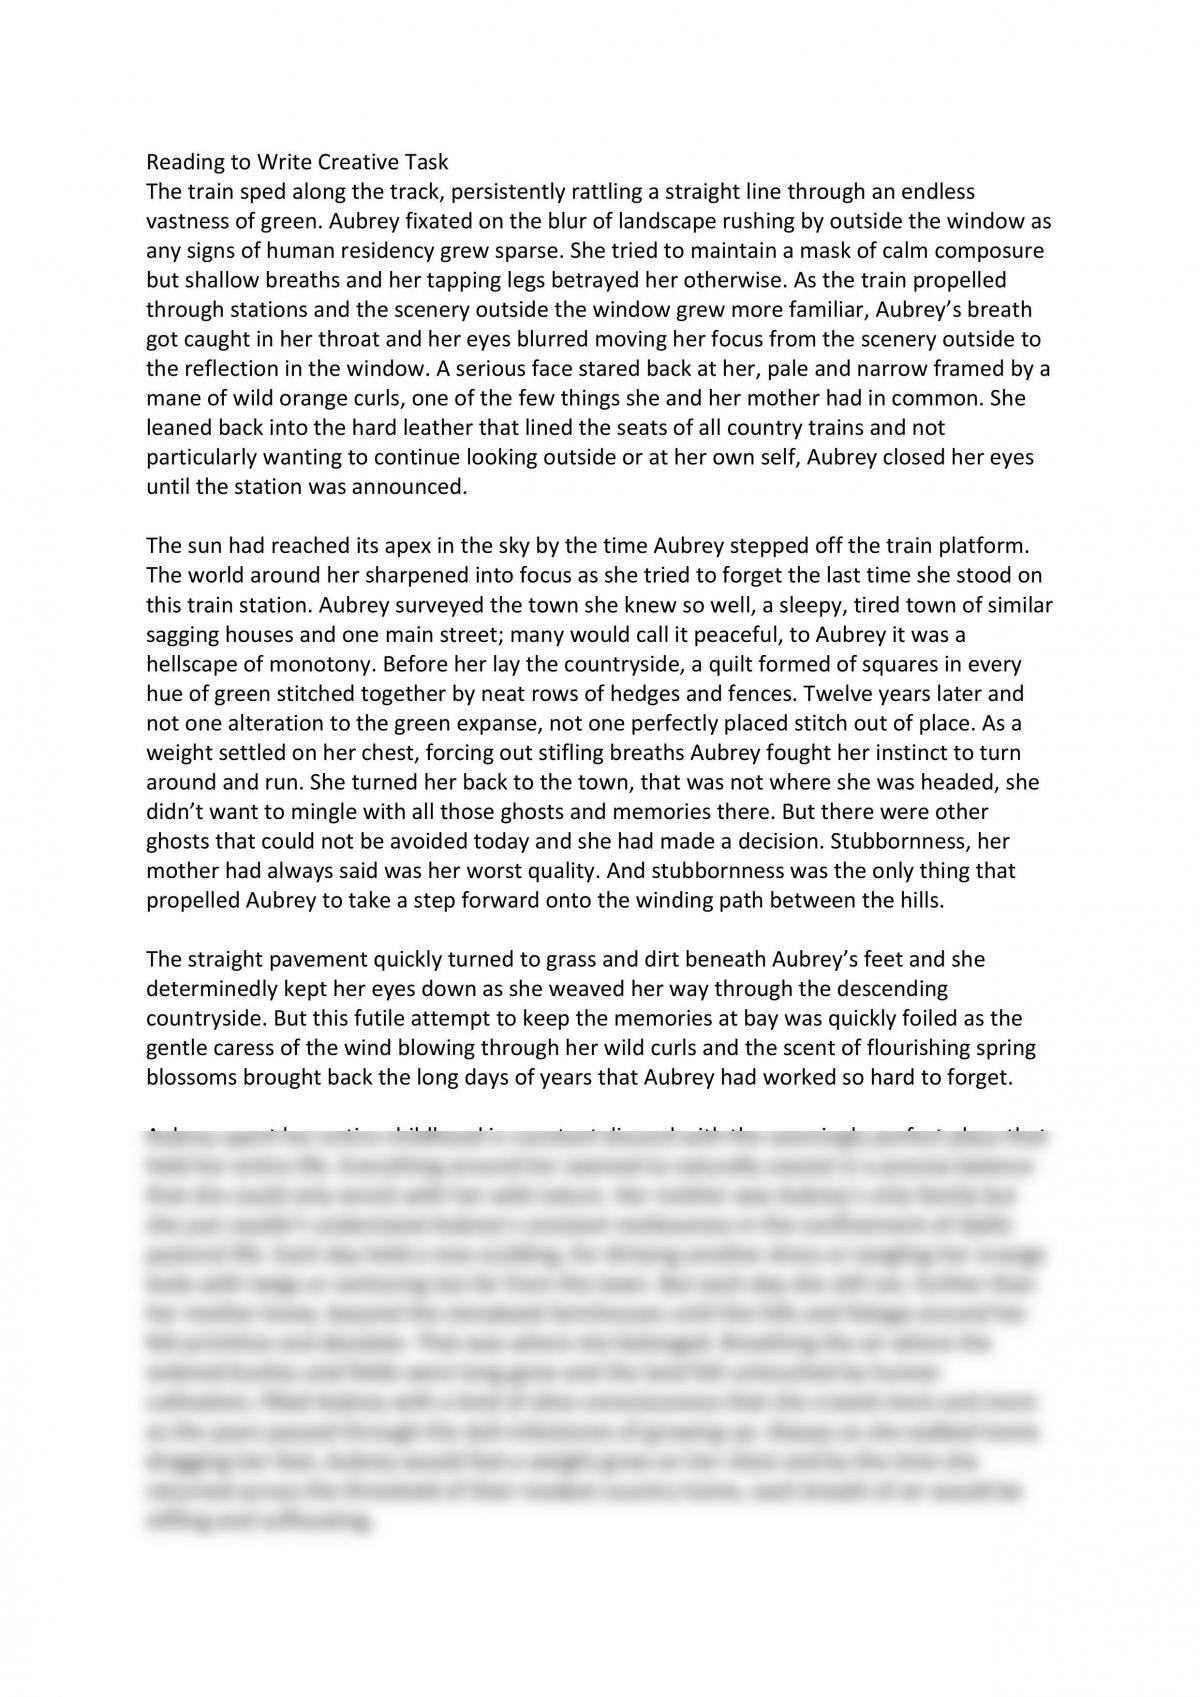 Creative for module Reading to Write  - Page 1